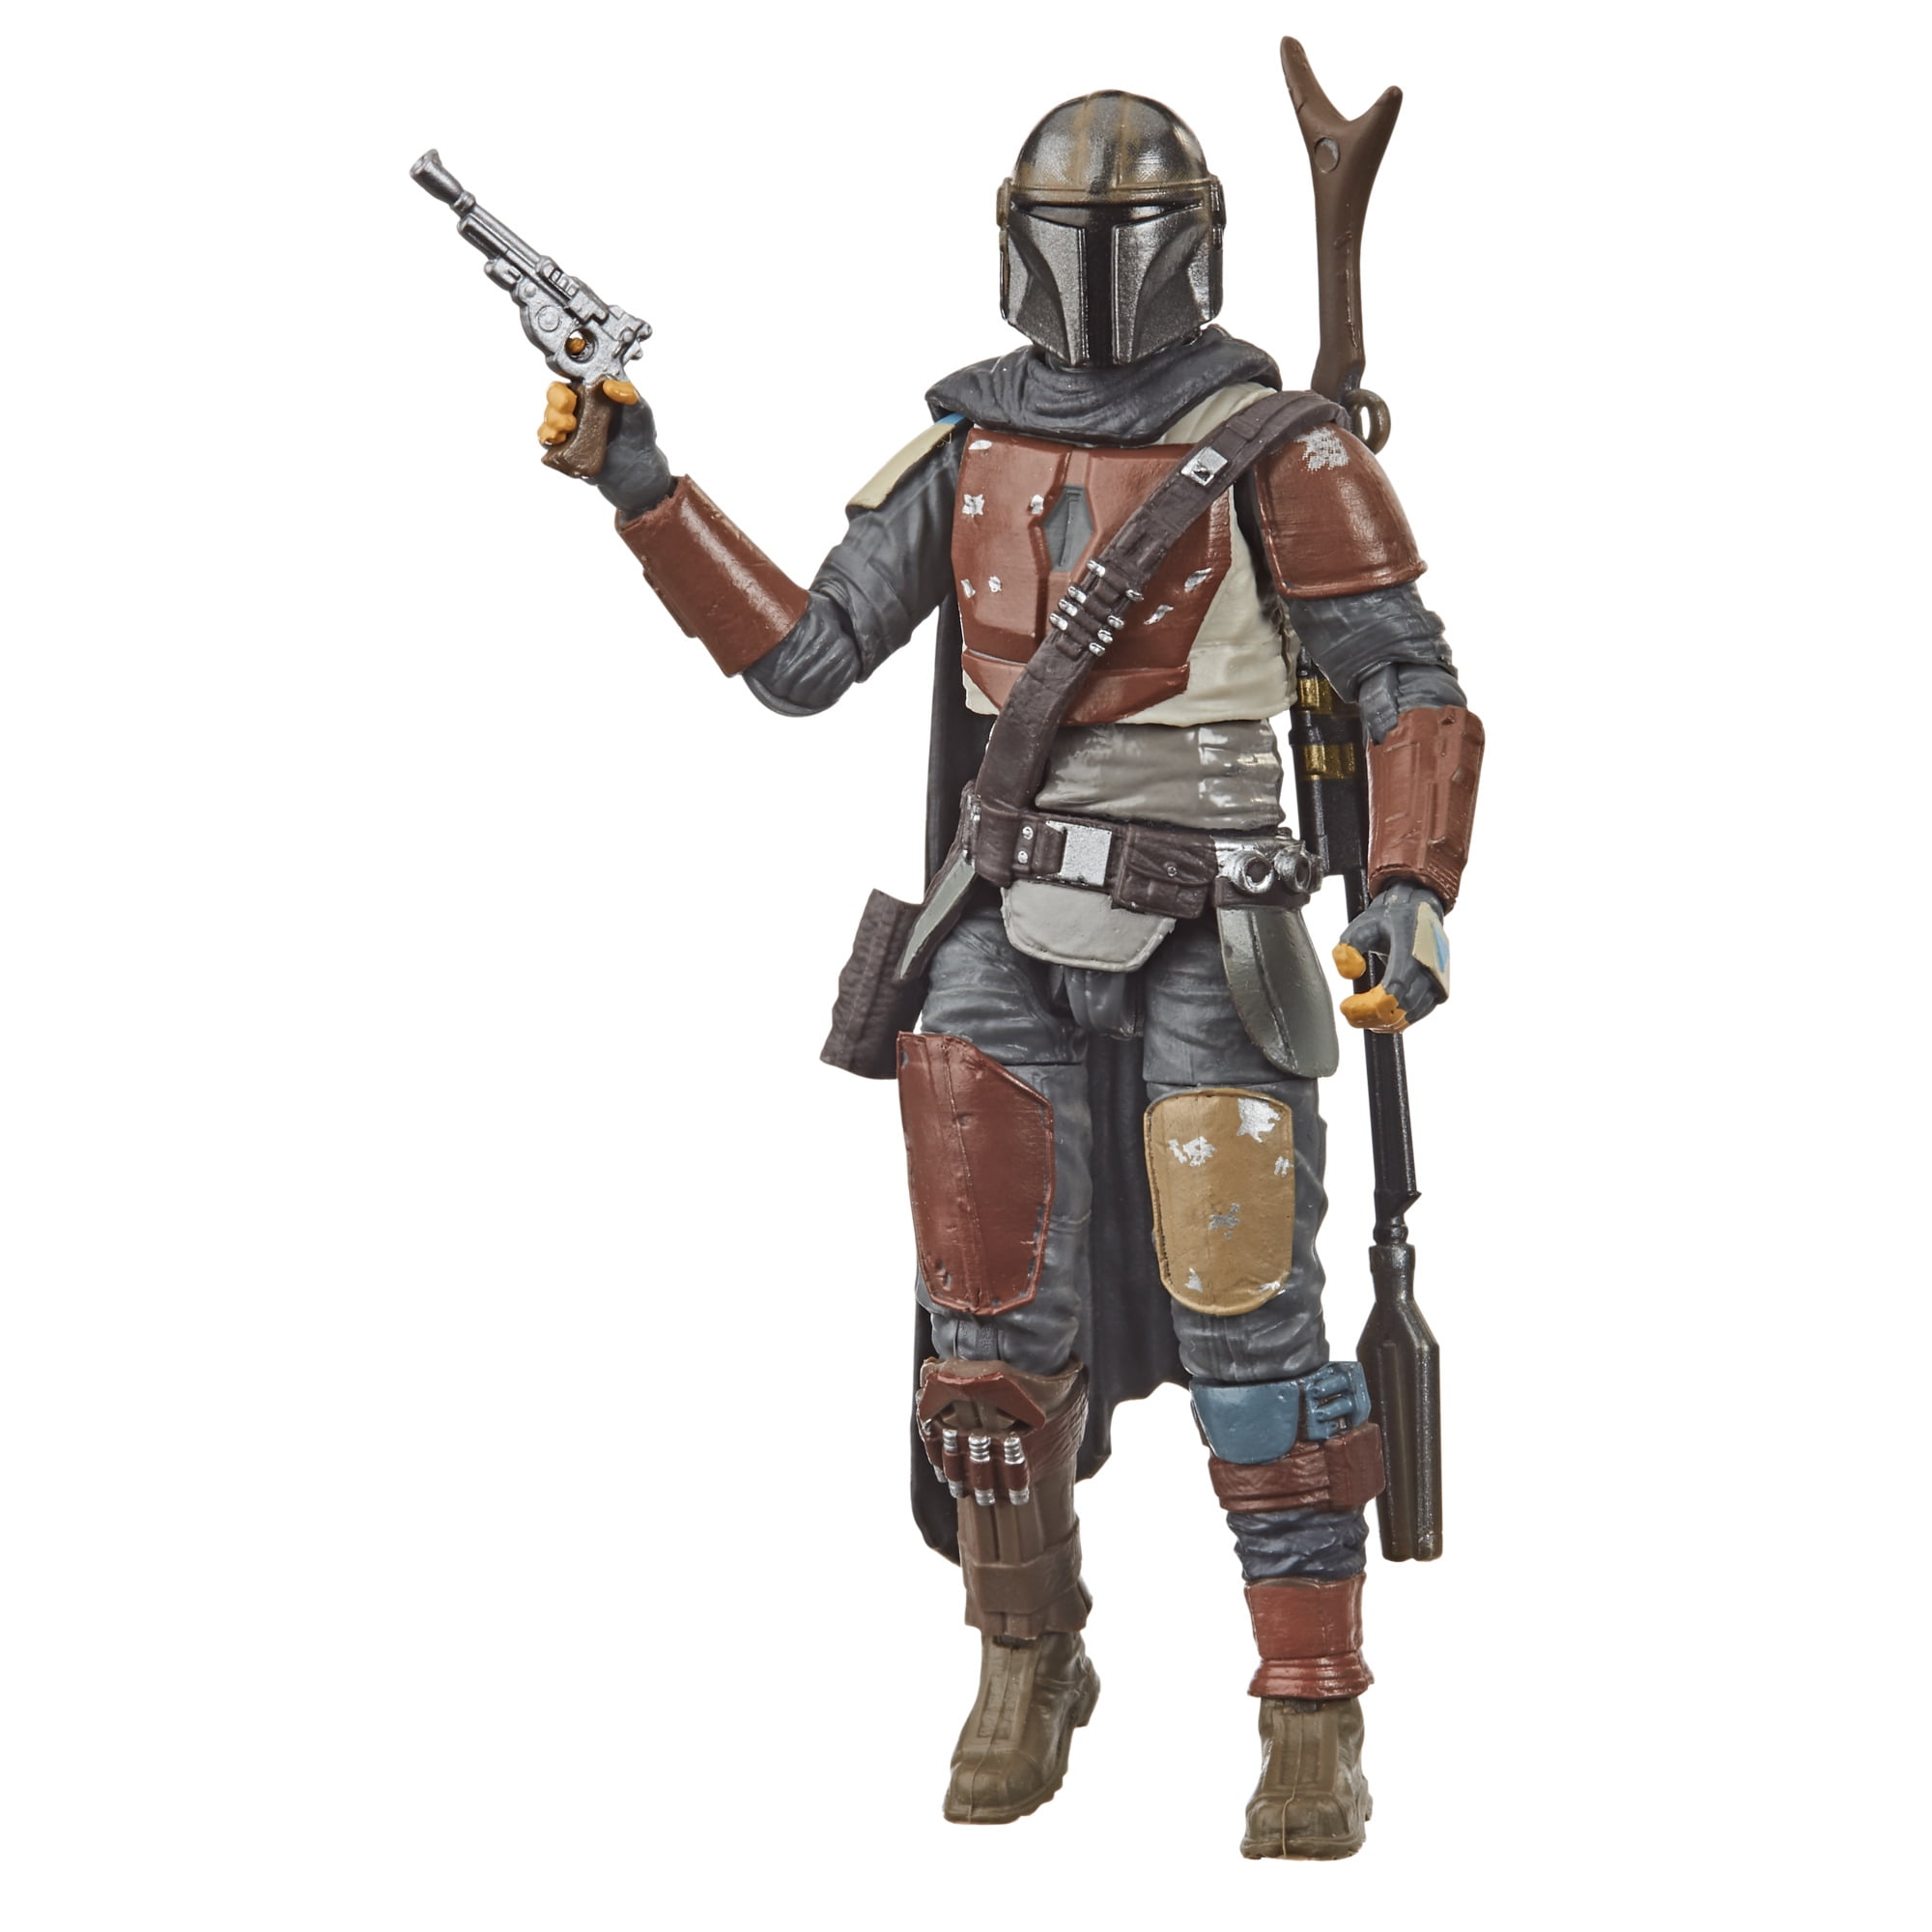 The Mandalorian and Child-Star Wars Vintage Collection-Walmart Only Din Djarin 